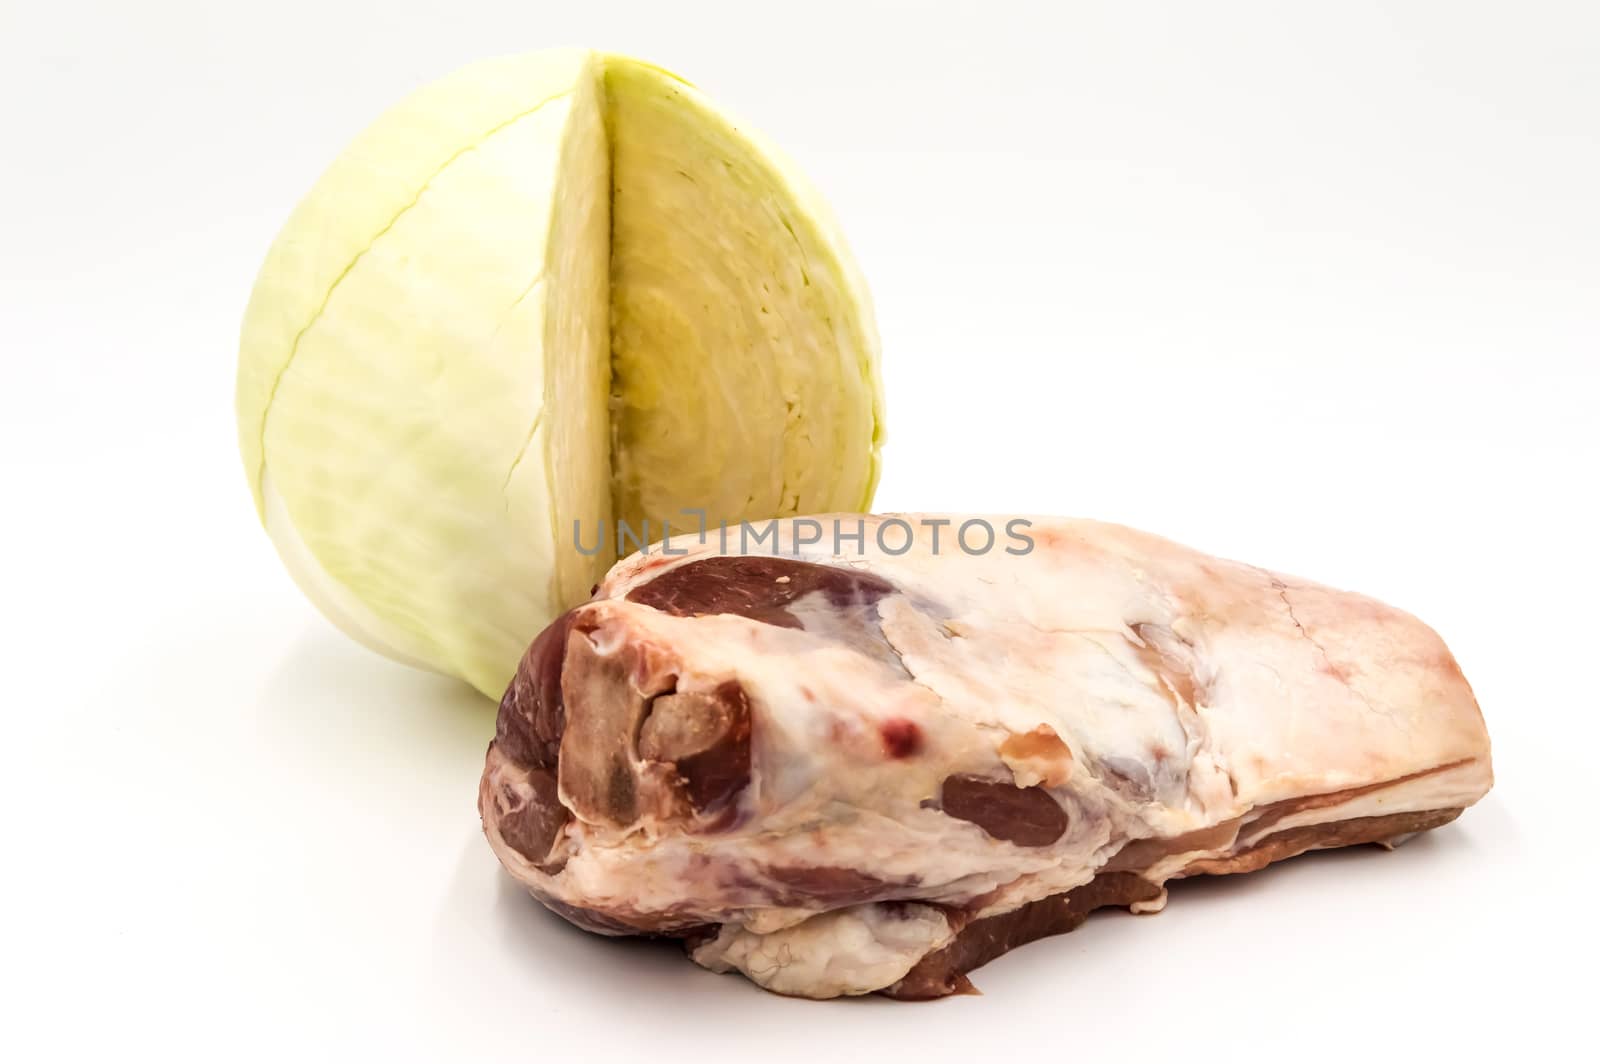 Lamb shoulder and white cabbage on a white background